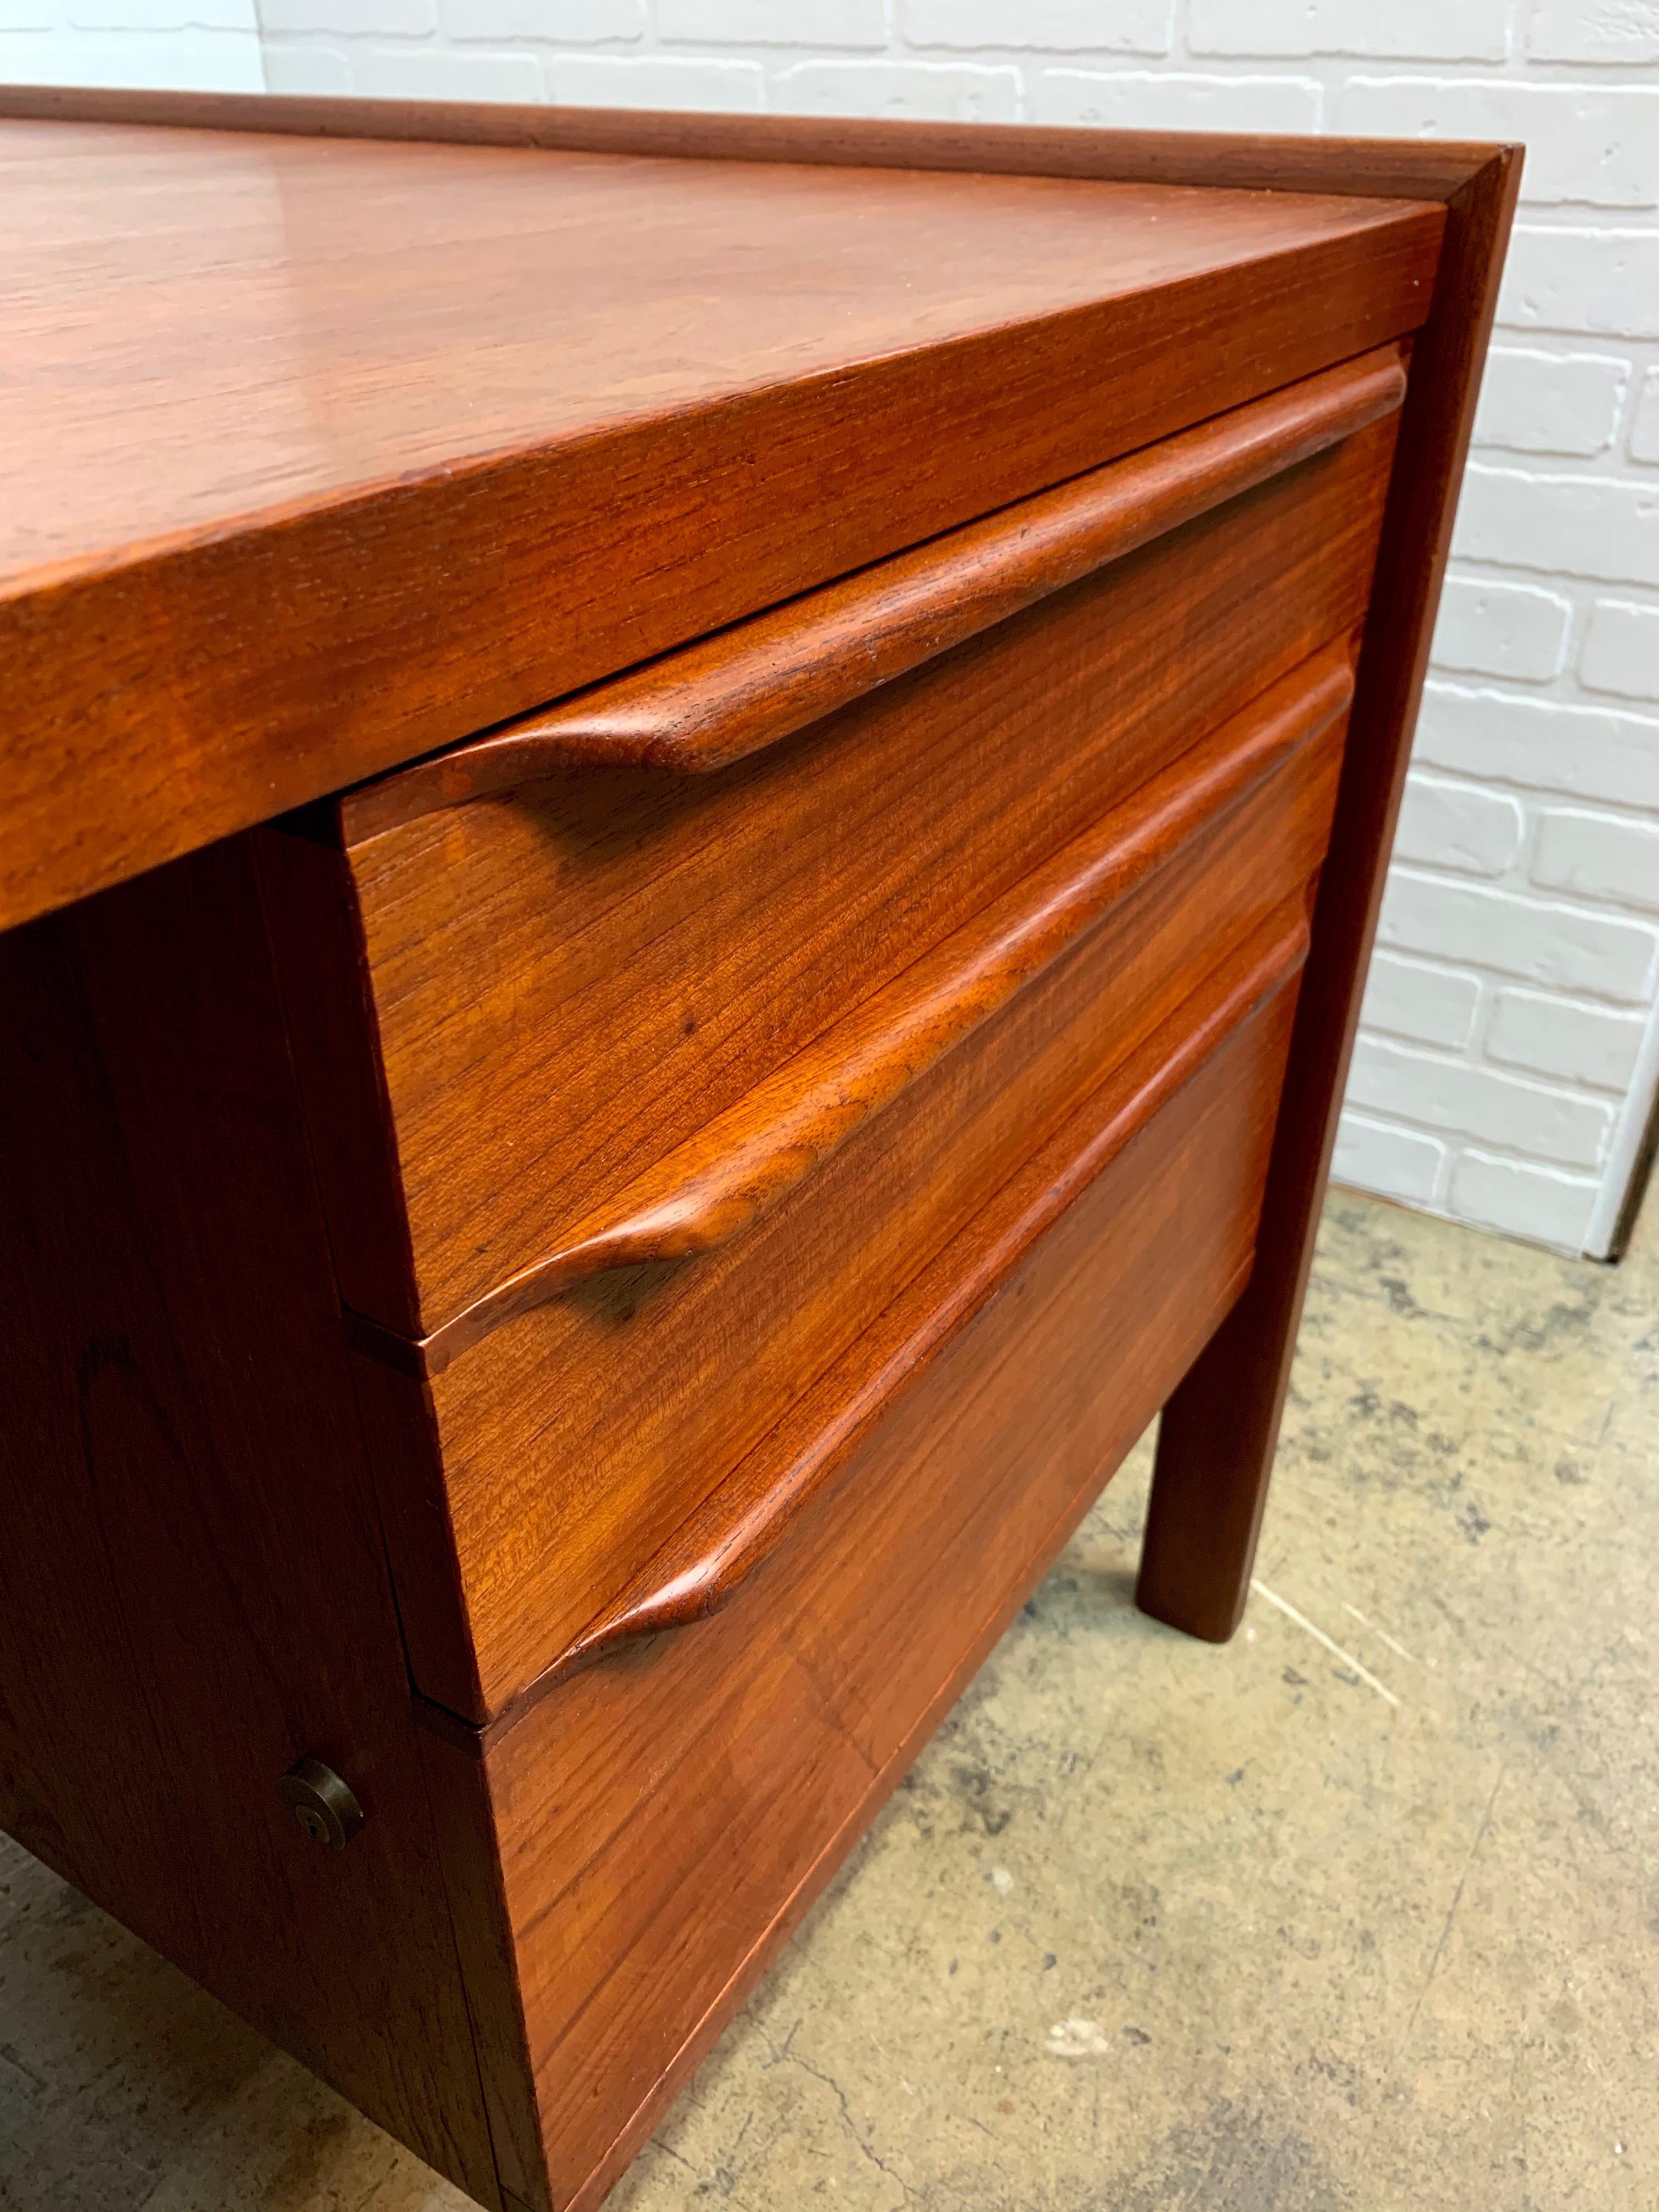 Very large executive teak Danish modern desk with sculptural drawer pulls and file drawer.